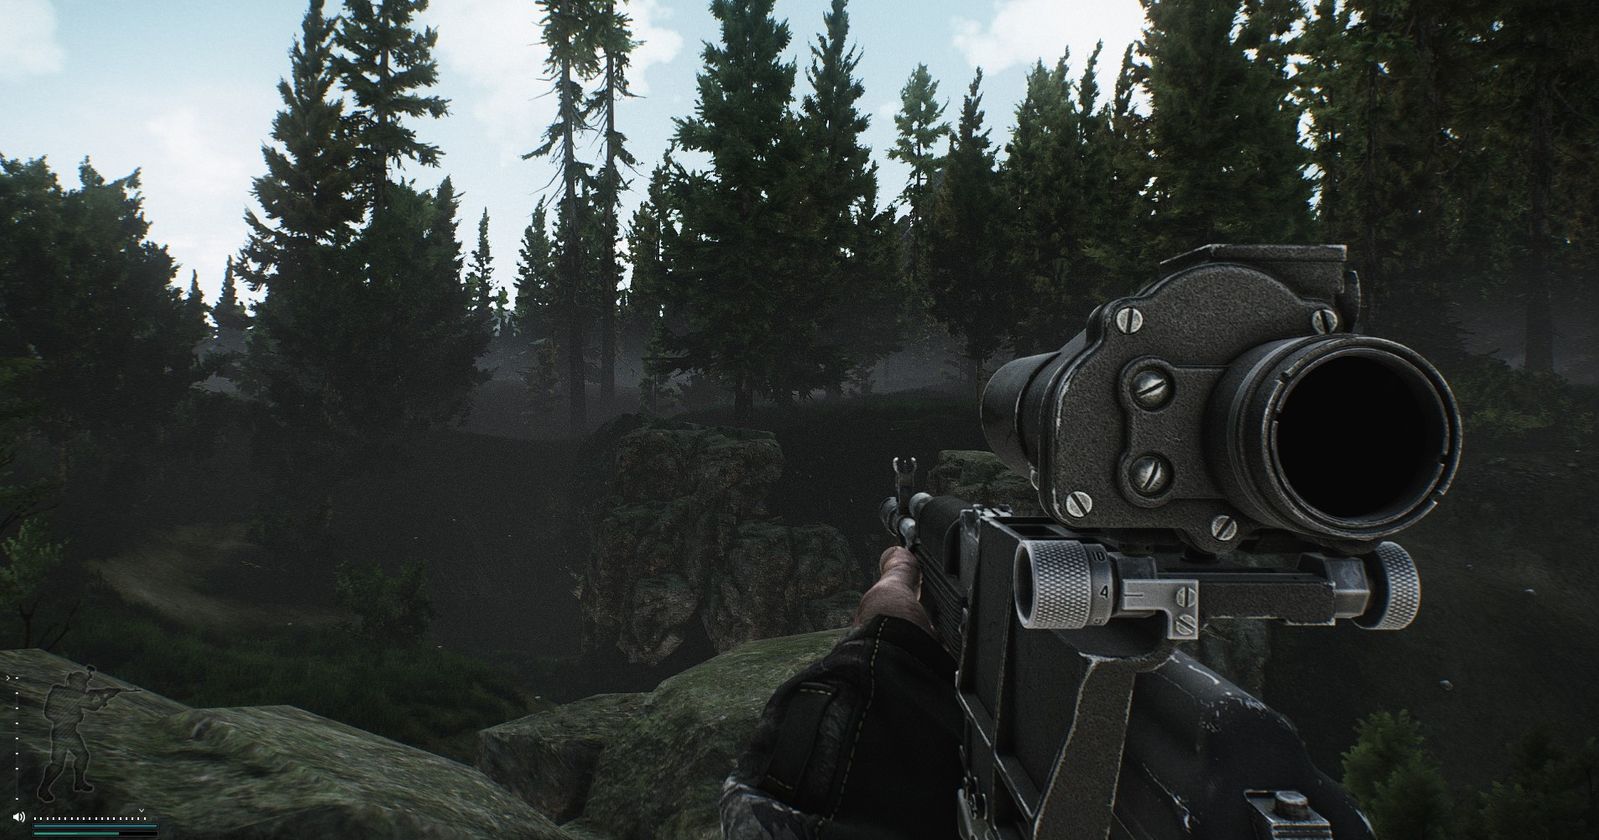 403, 404 error on our website - Escape from Tarkov